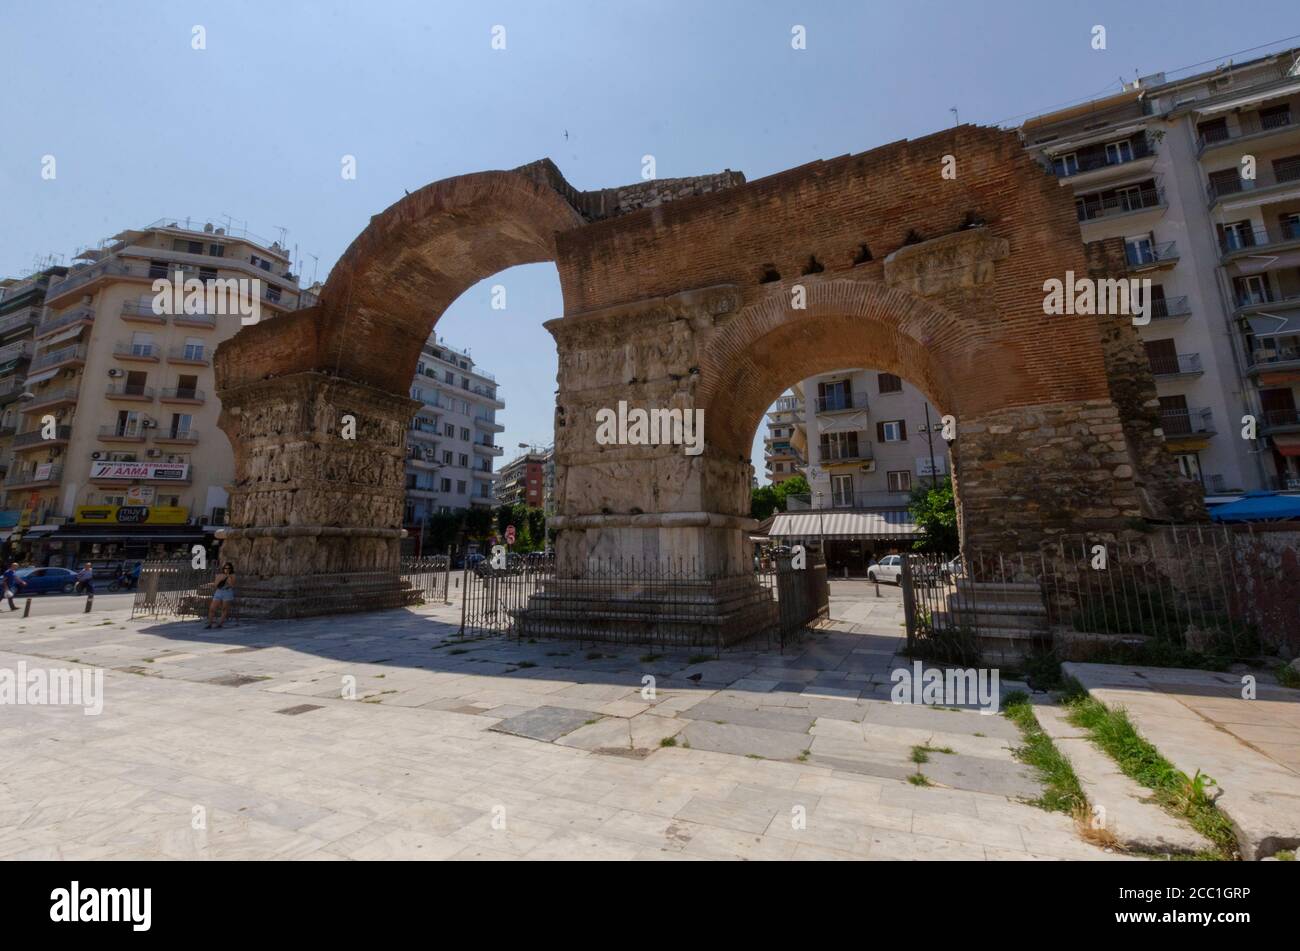 General view of the famous Arch of Galerius Thessaloniki Macedonia Greece. This landmark was formerly an Ottoman fortress and a prison - Photo: Geopix Stock Photo